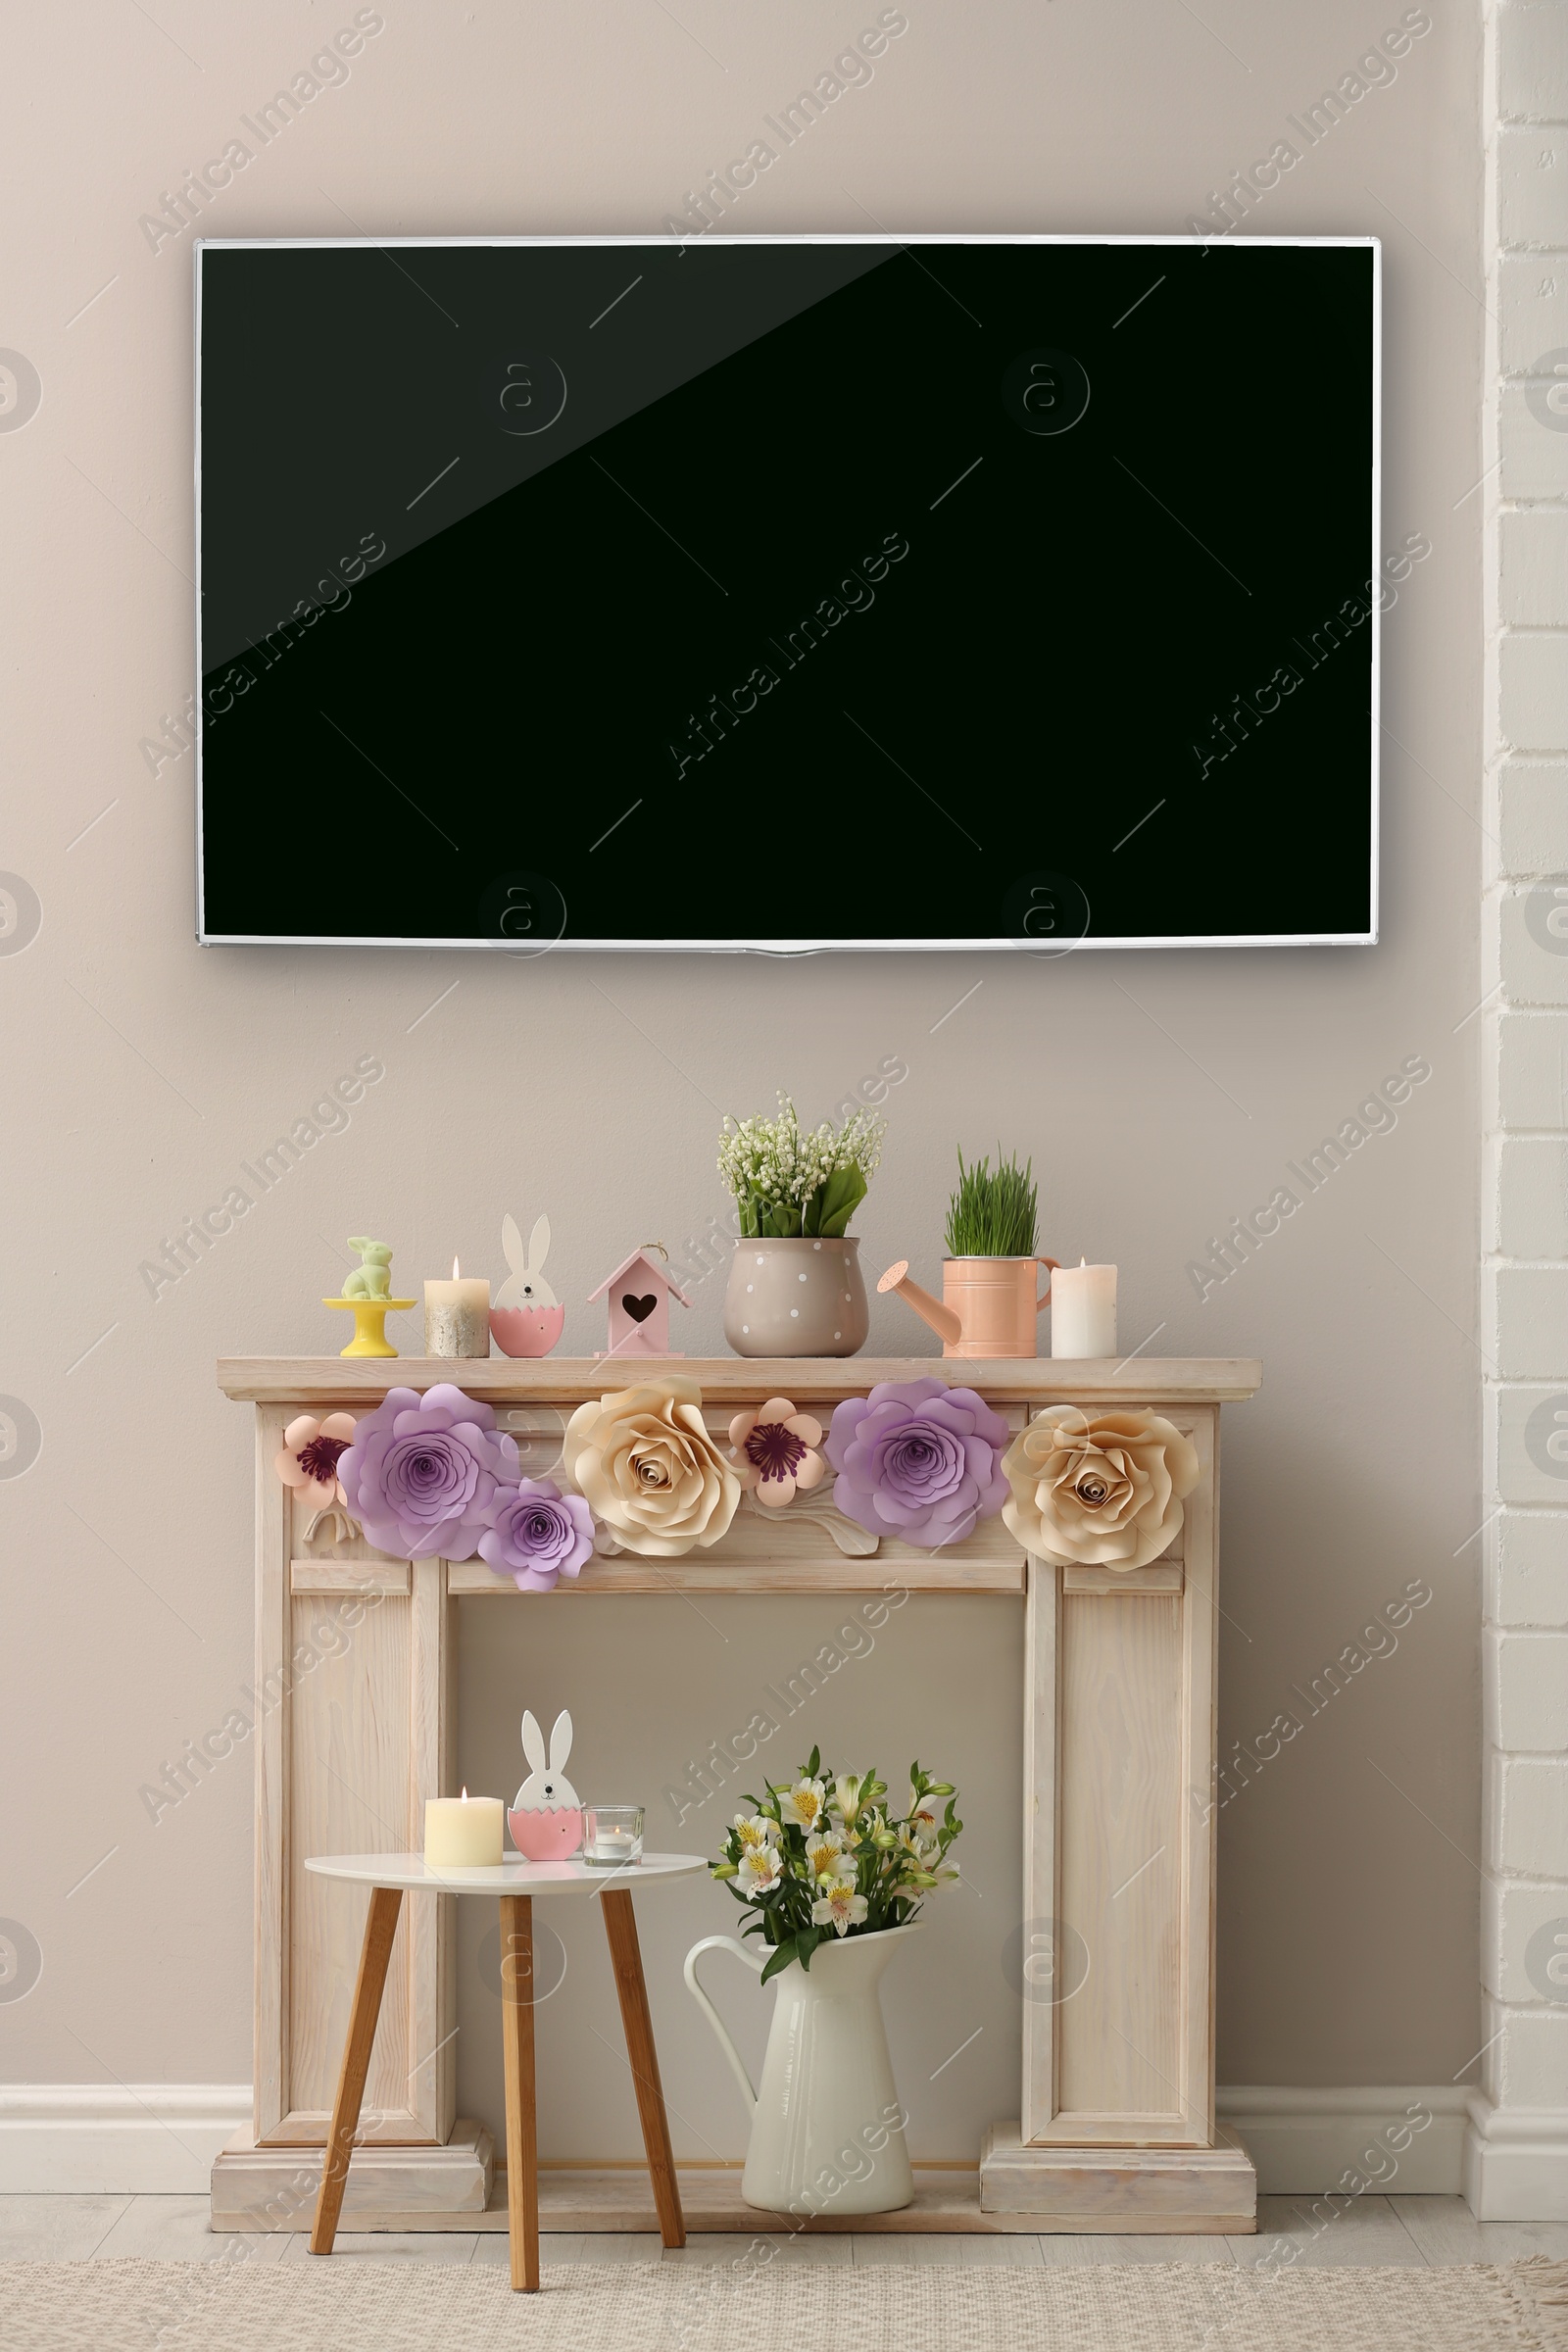 Image of Modern wide screen TV and decorative fireplace with beautiful spring decor in room